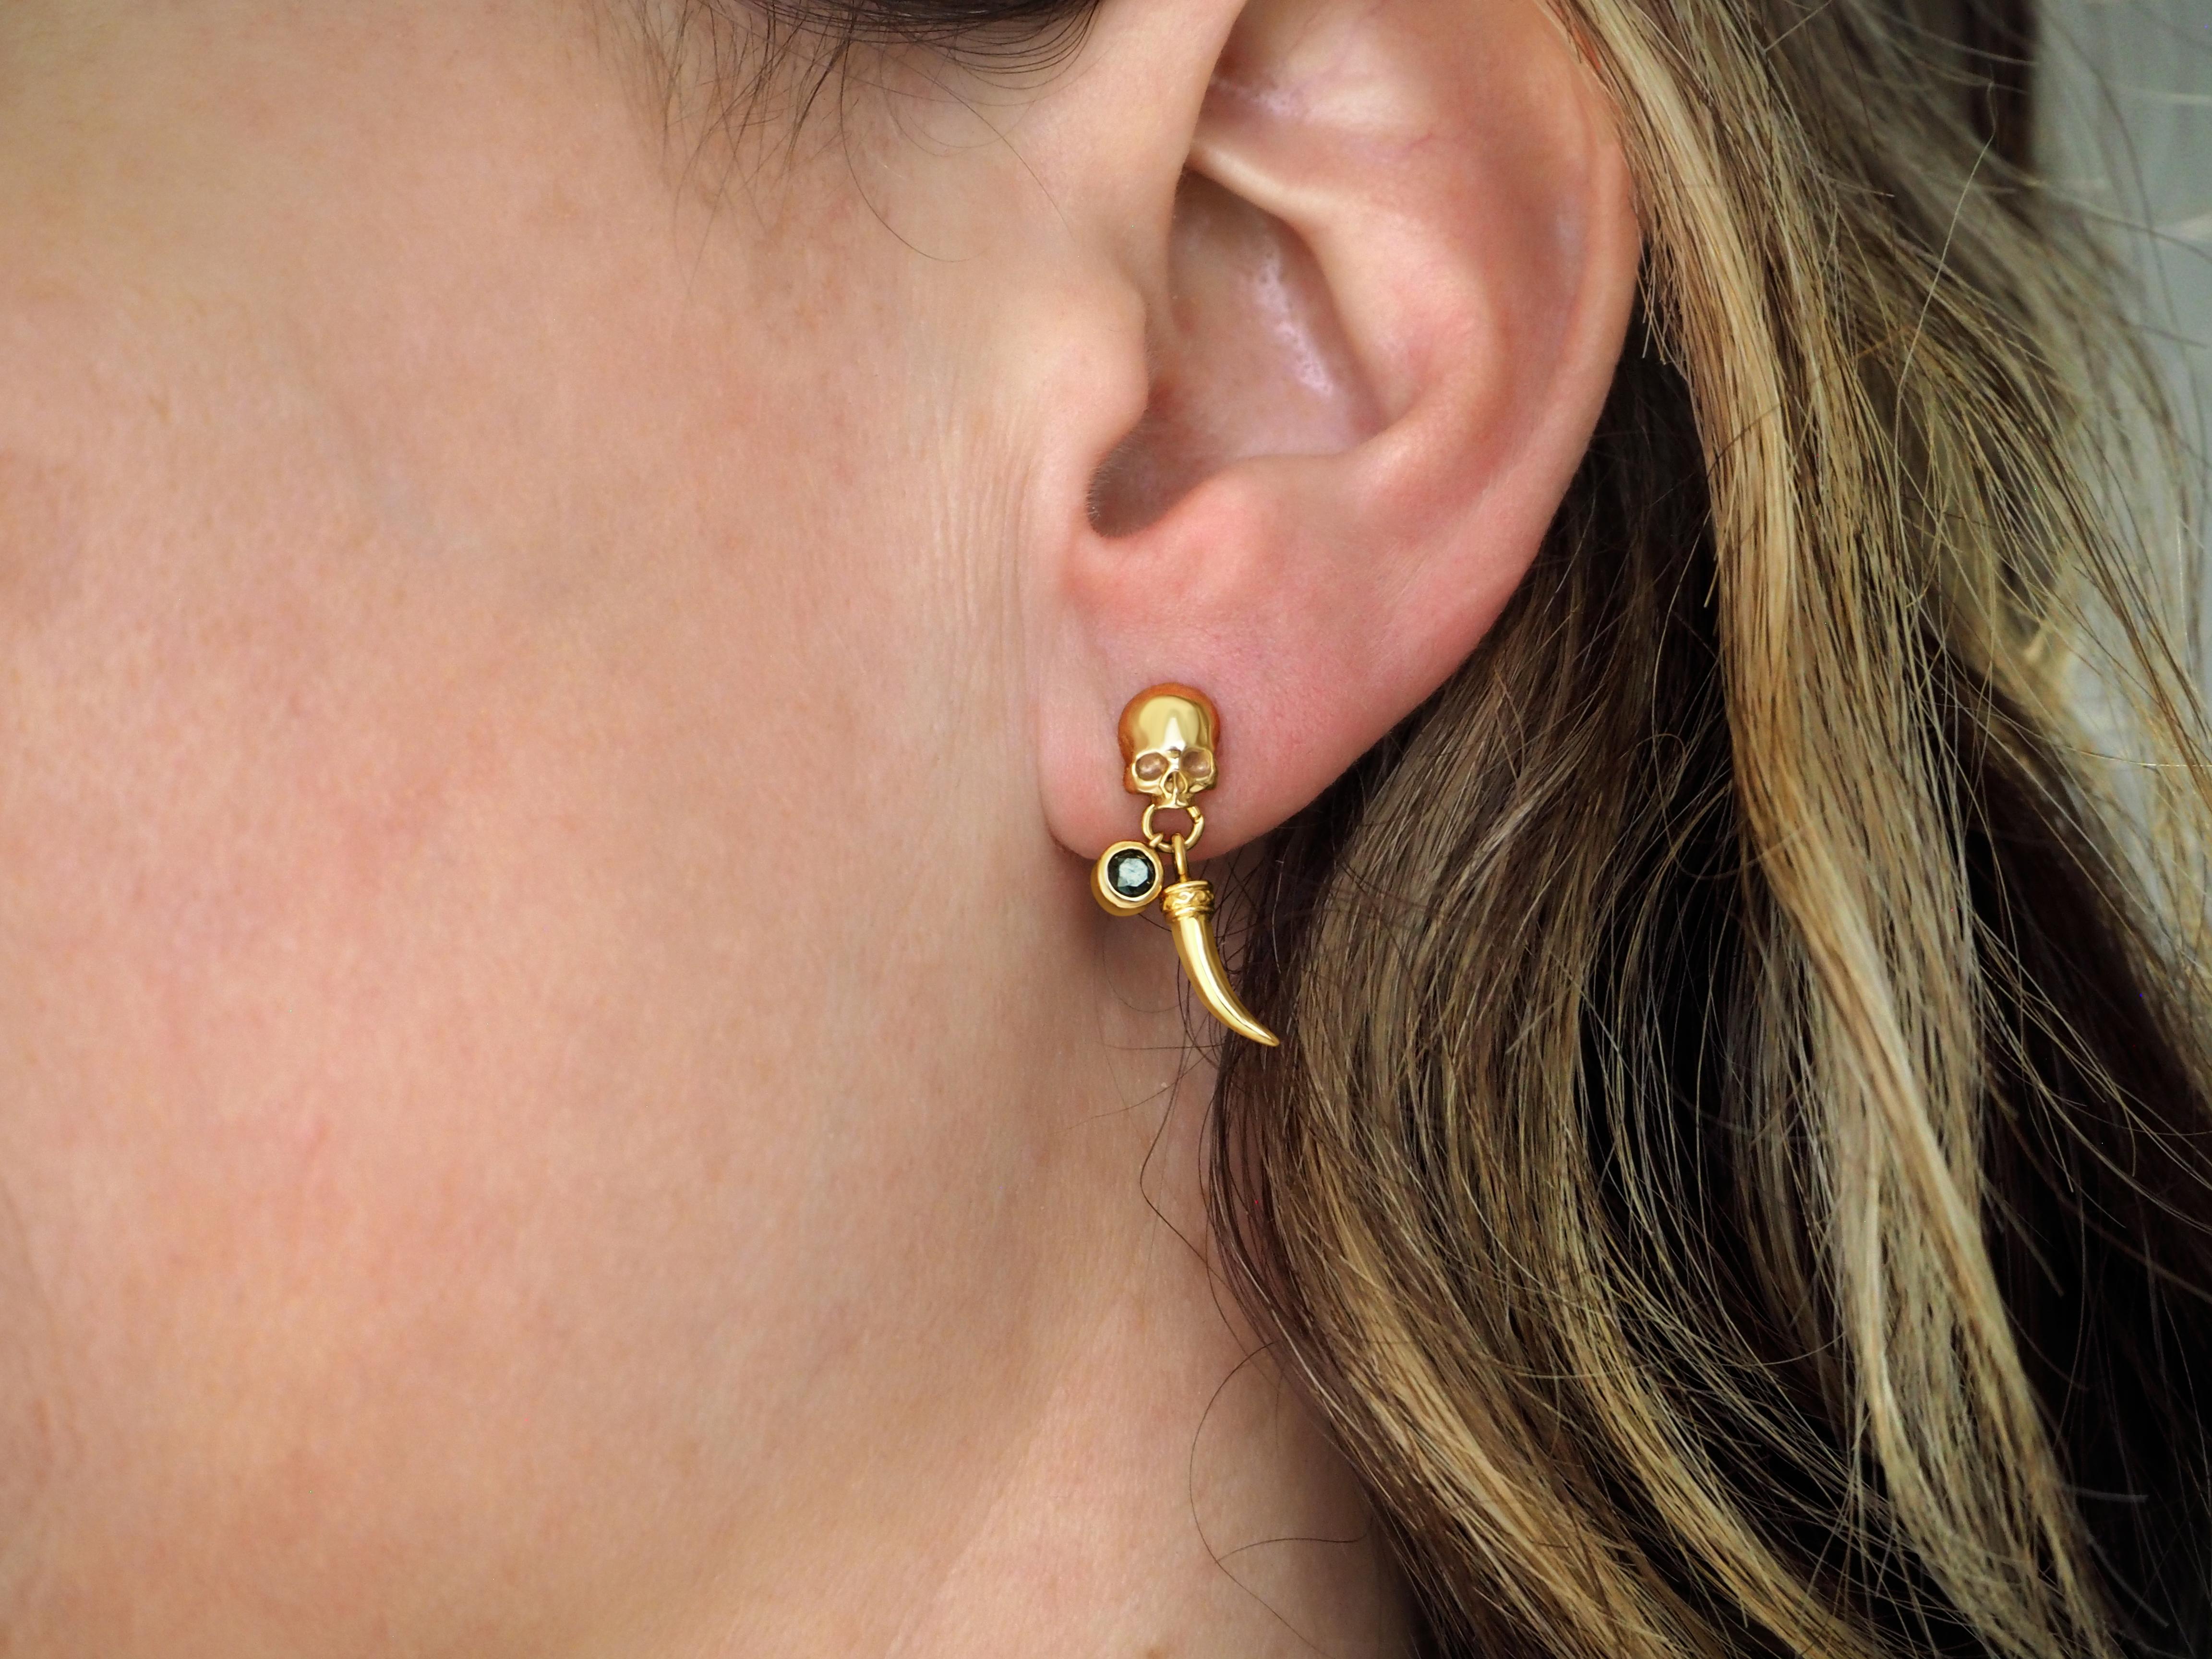 14ct Gold Skull Earring with Emerald & Tusk 

This custom single-drop earring features a shiny dimensional skull on the top, giving it an ethereal gothic look, beautifully handcrafted with attention to detail. This striking 3D skull suspends a